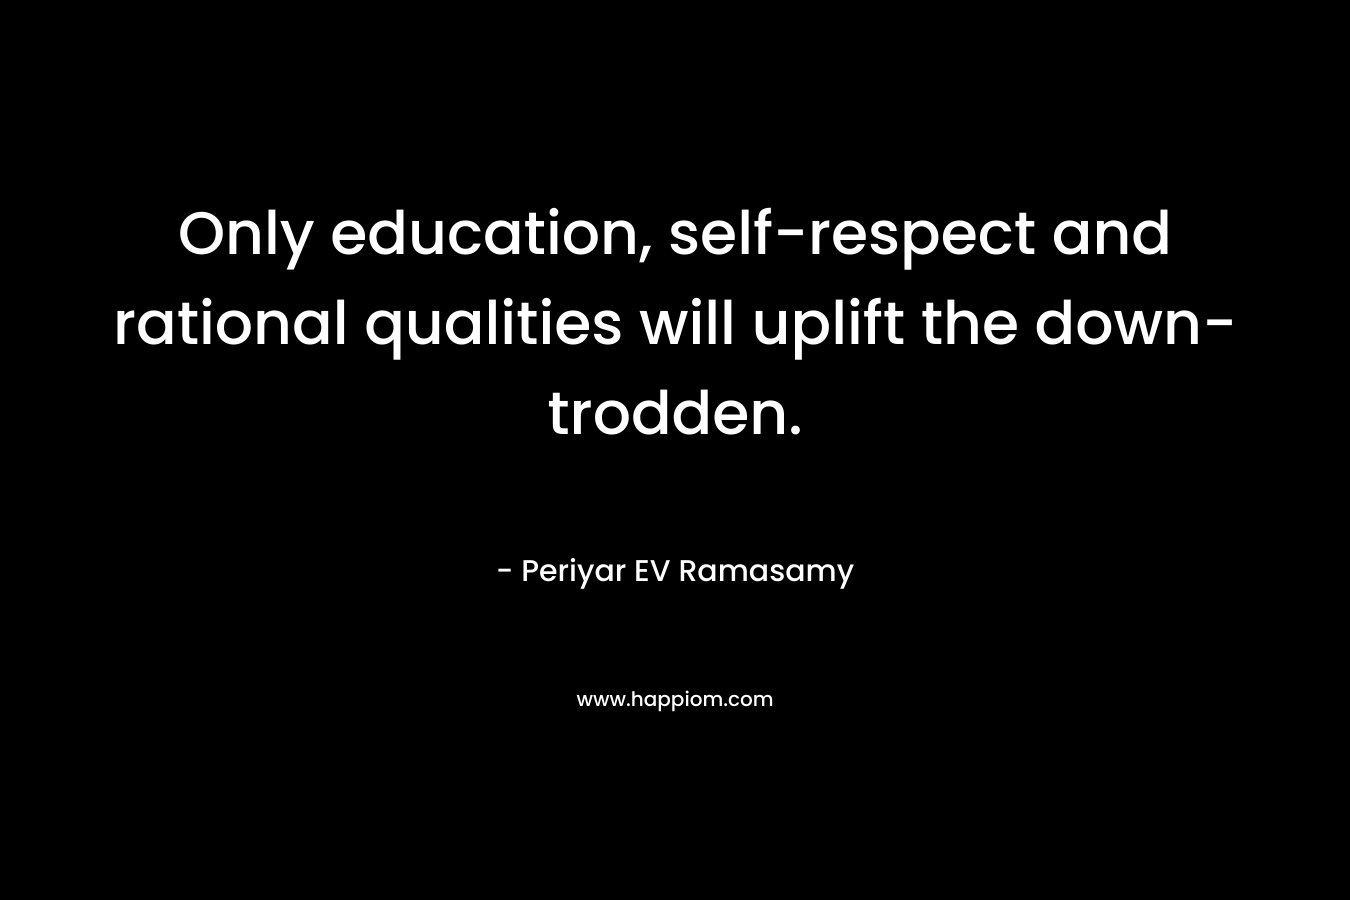 Only education, self-respect and rational qualities will uplift the down-trodden.